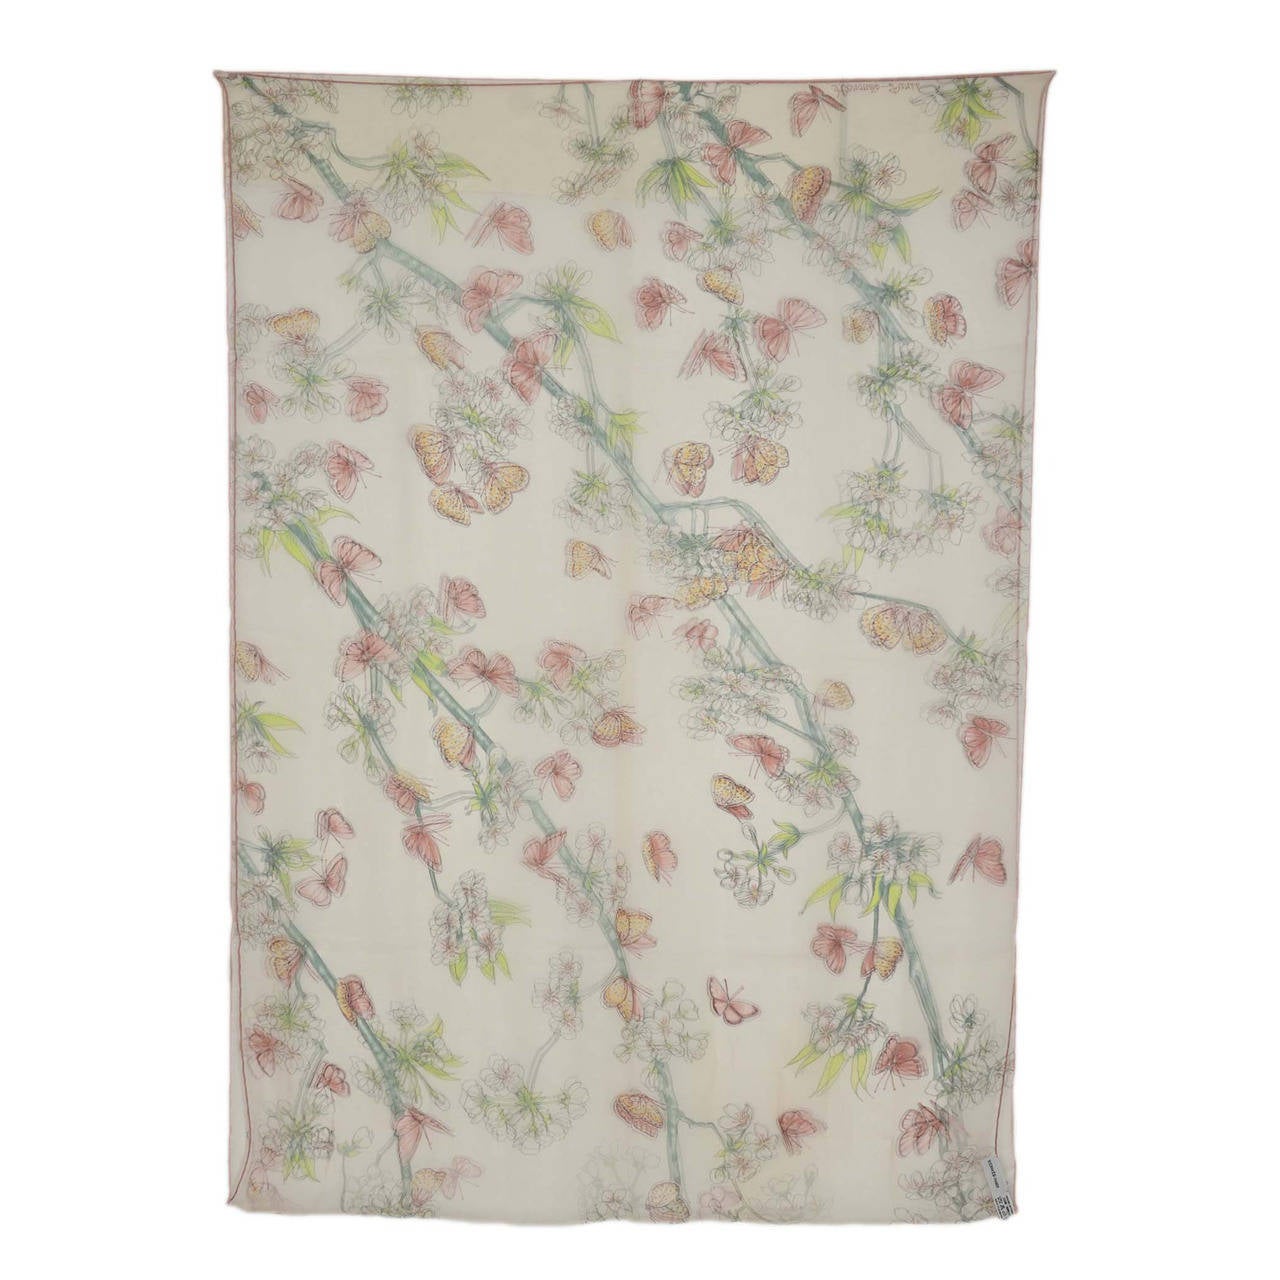 HERMES Pale Pink Floral & Butterfly Silk Scarf